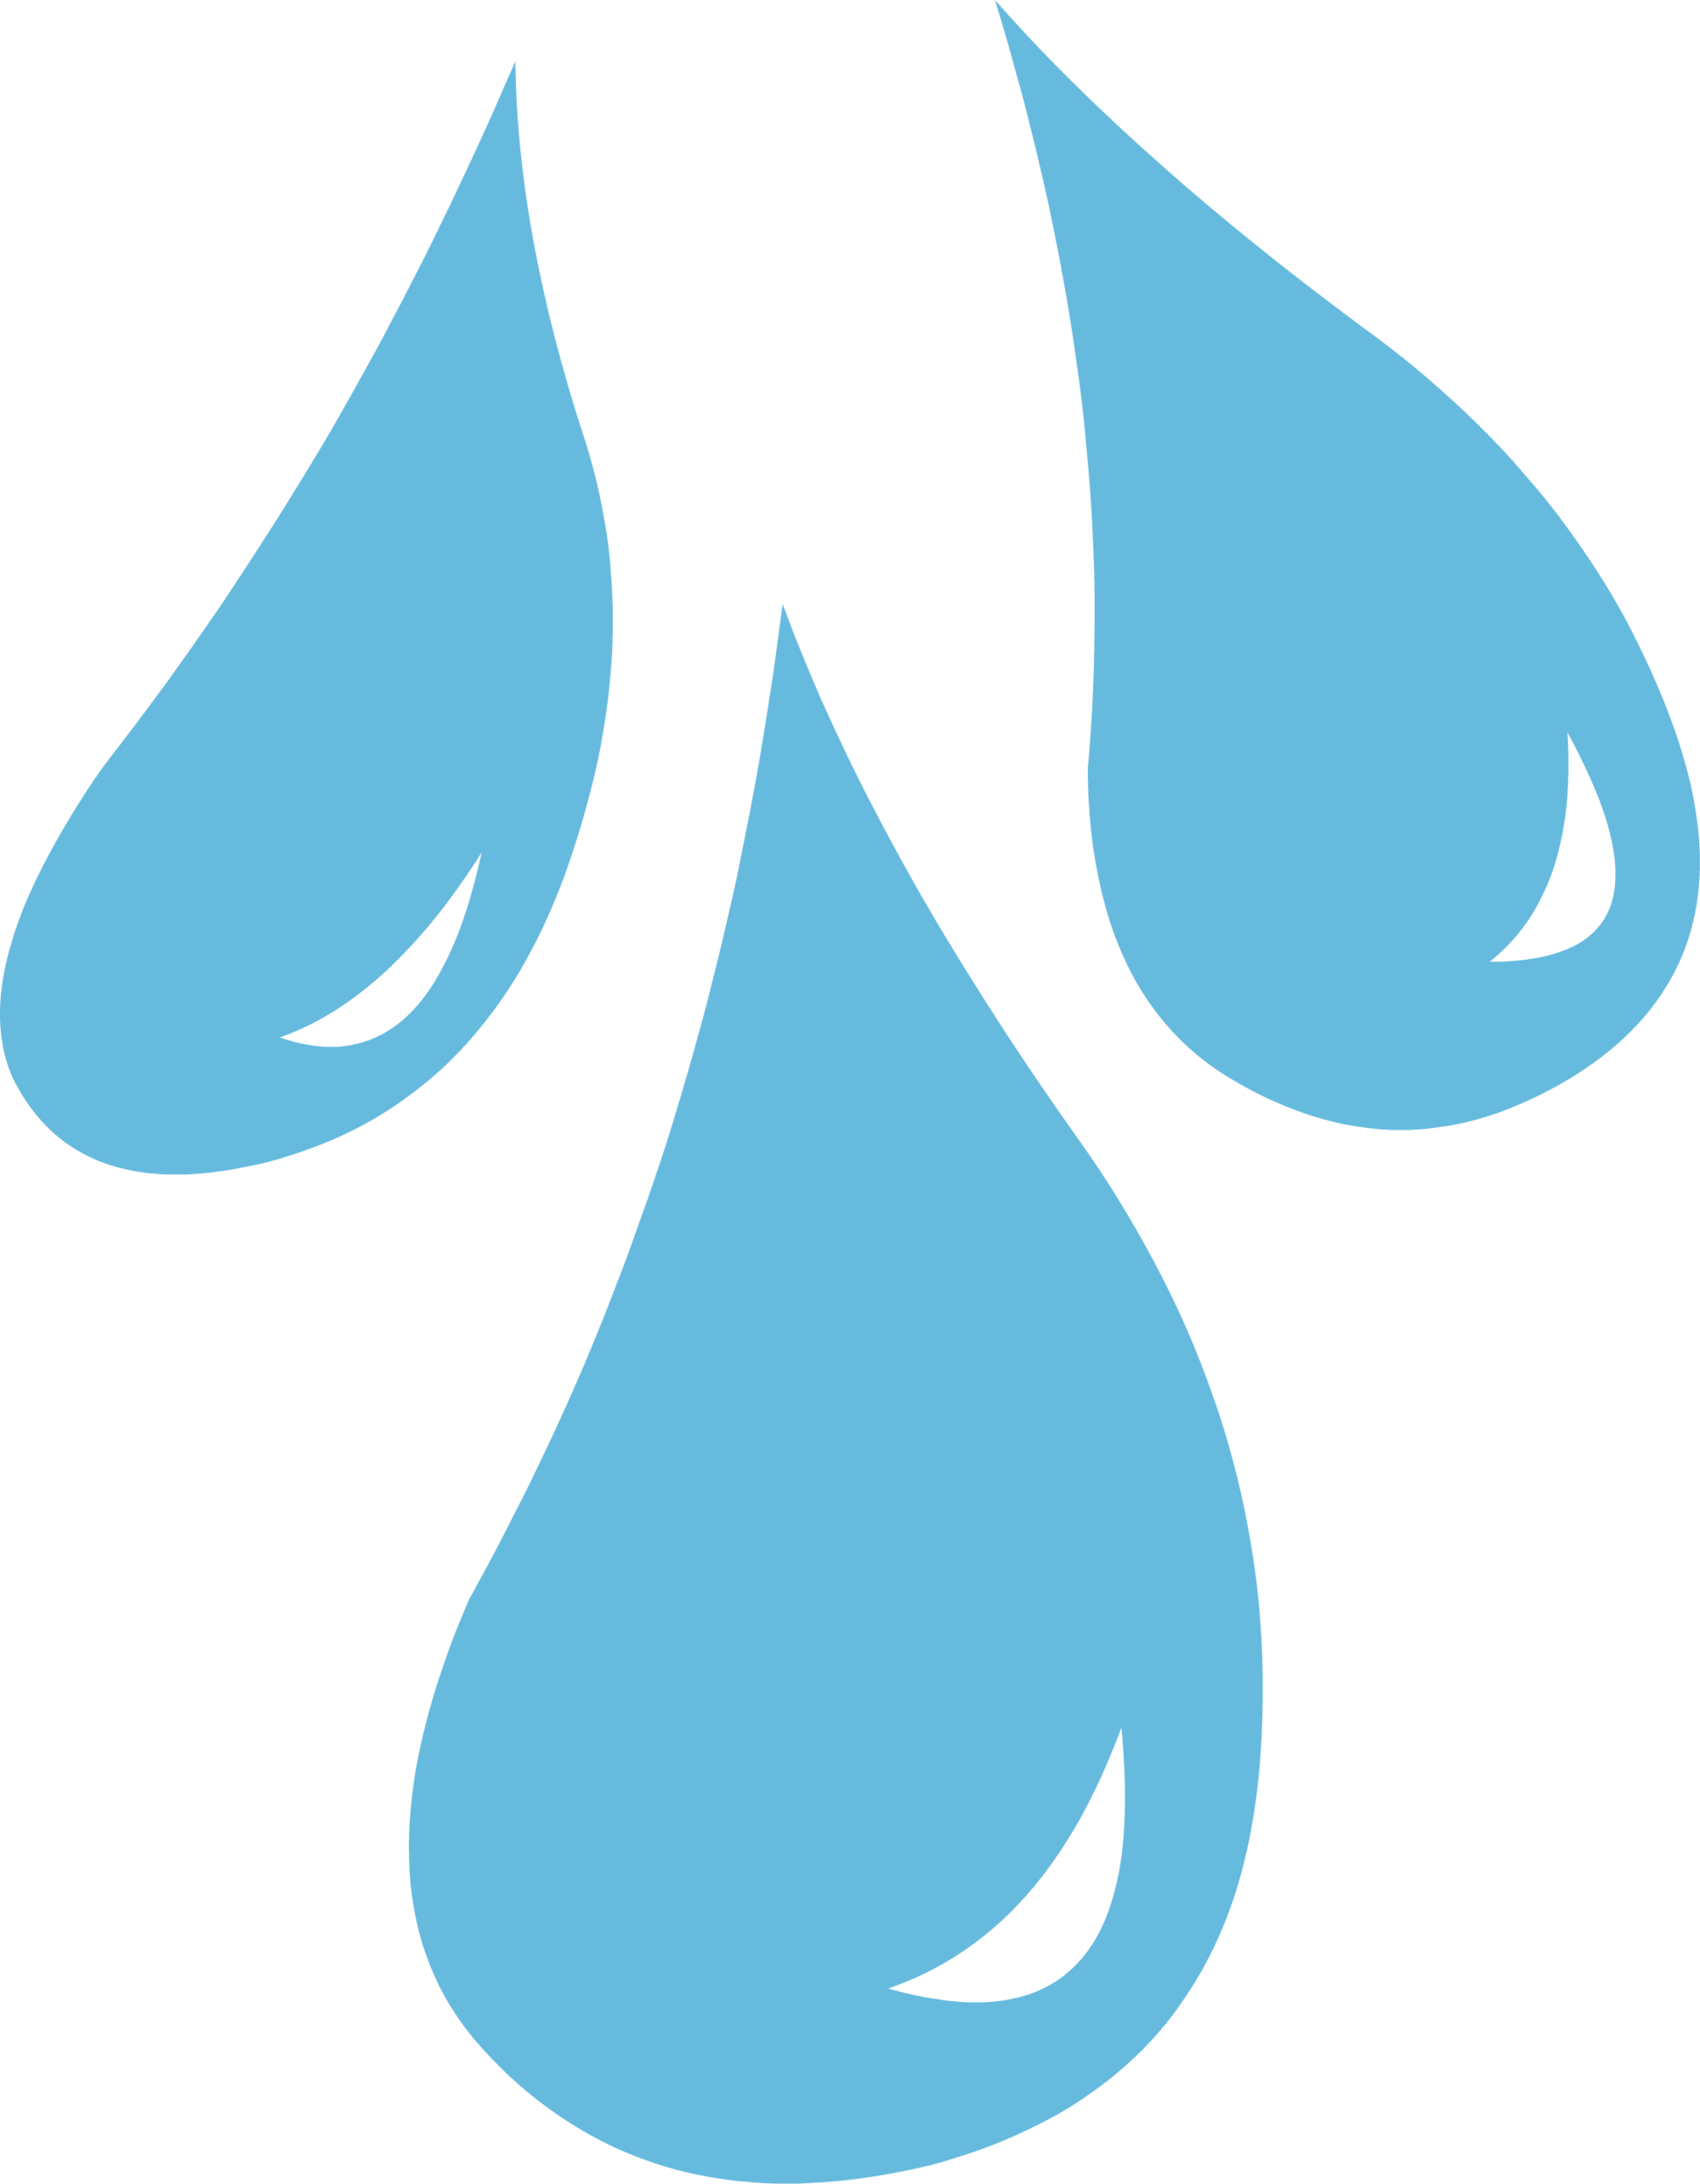 raindrop clipart angry